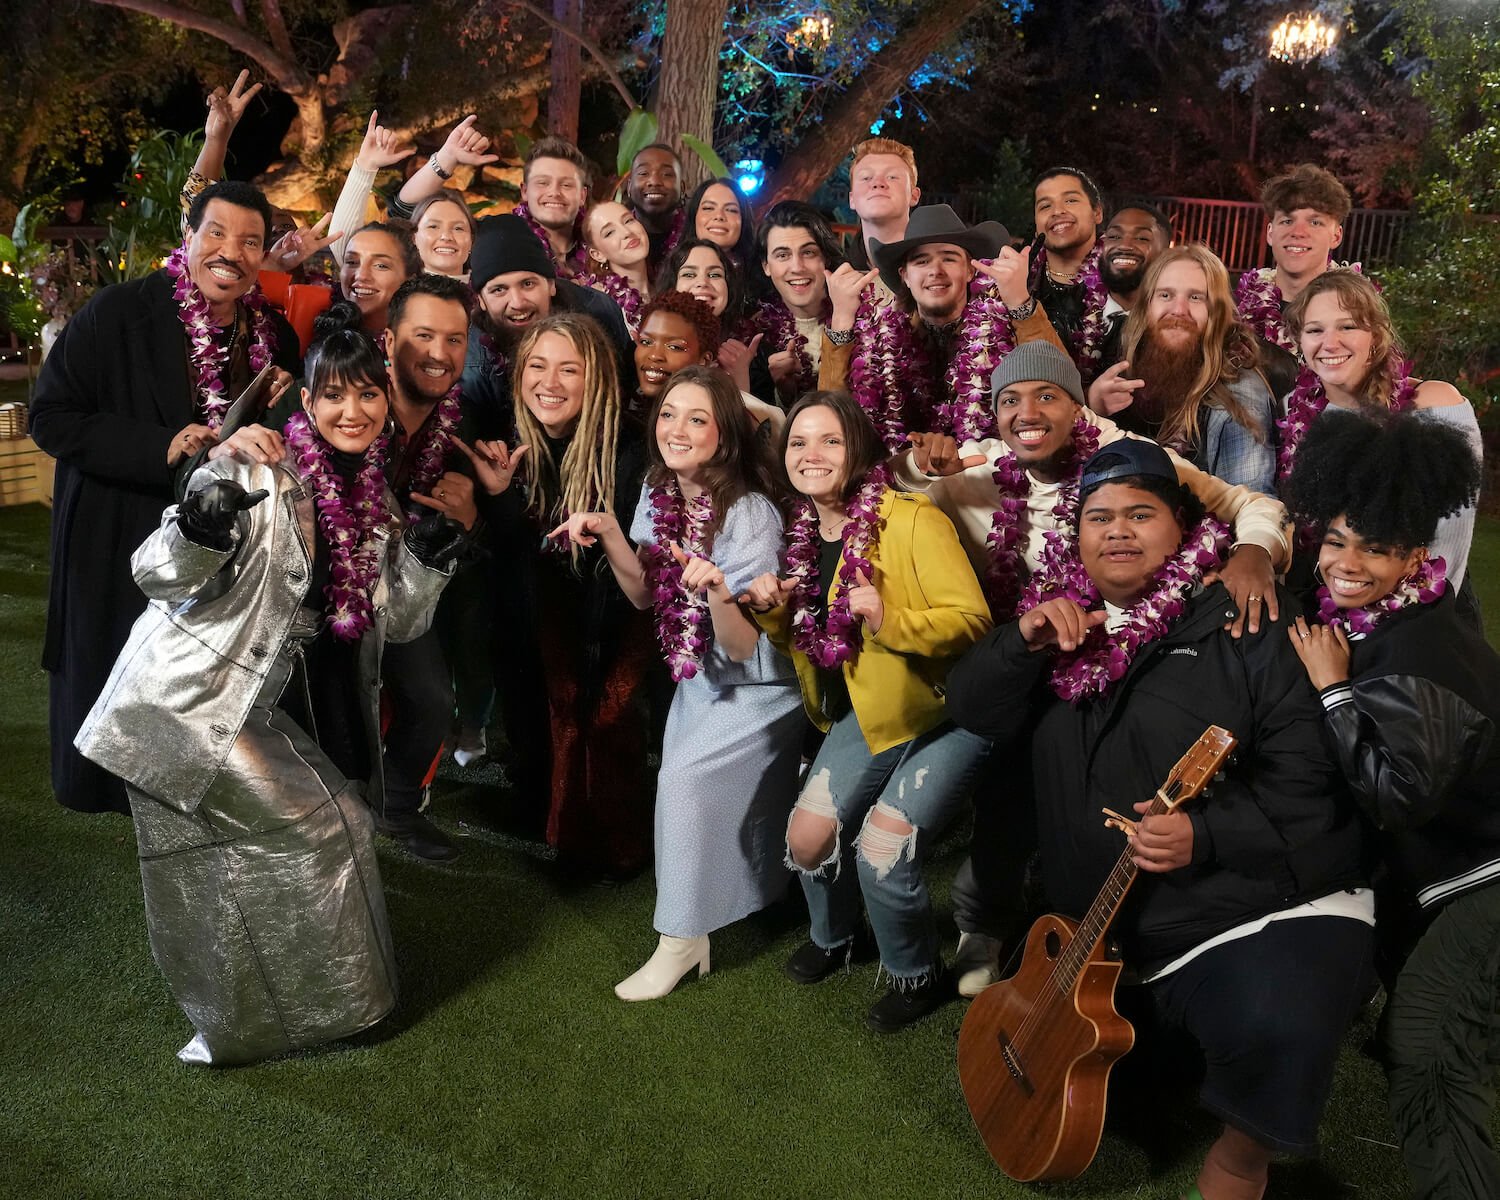 'American Idol' 2023 cast members in the top 26 smiling together and posing. 'American Idol' 2023 spoilers note the top 20 move on from Hawaii.